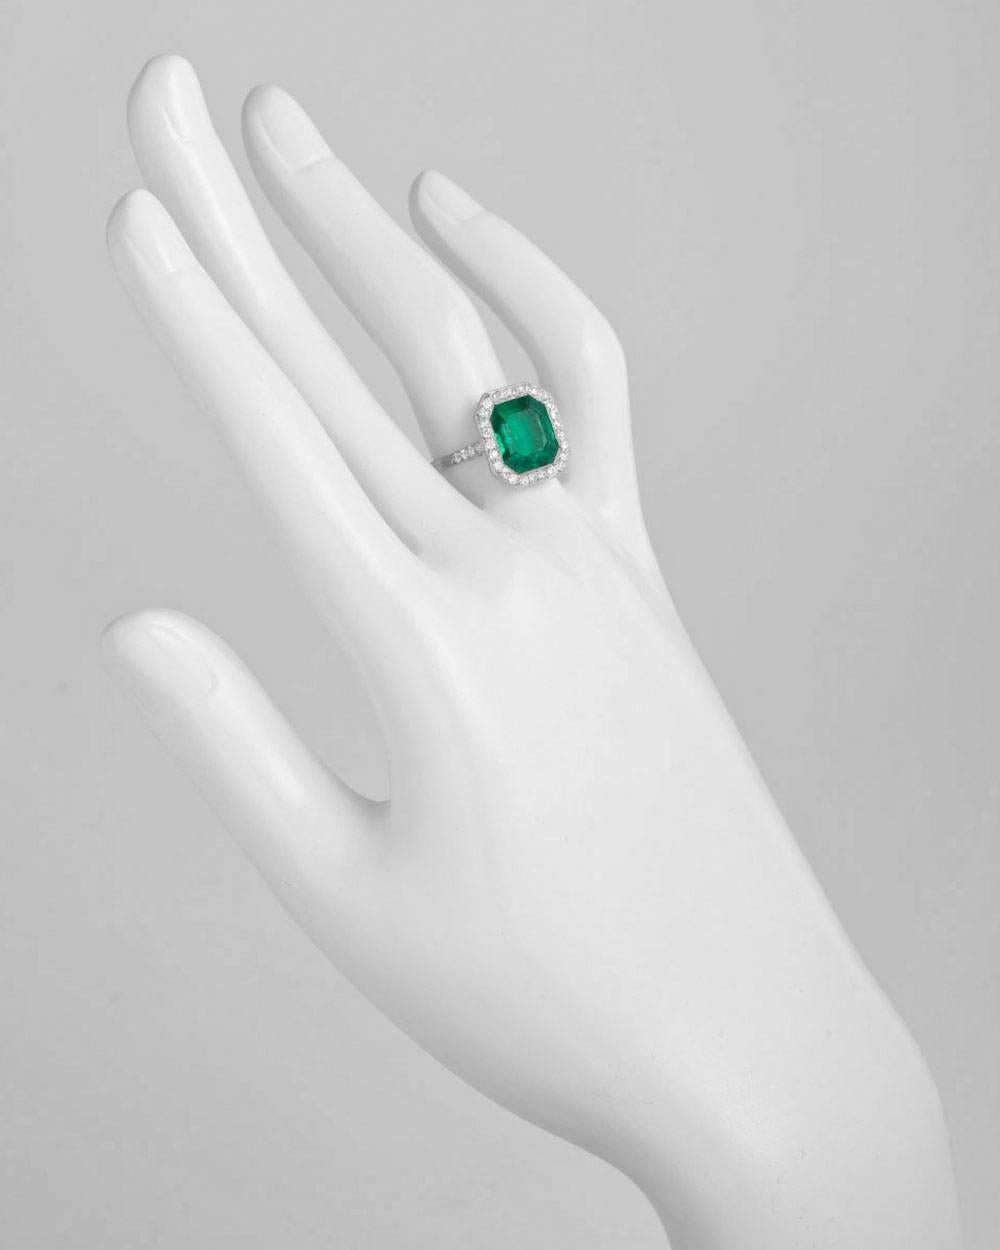 Colombian emerald and diamond ring, centering on an octagonal-shaped emerald-cut emerald weighing 3.70 carats, with diamond surround and partway bead-set diamond band, mounted in platinum, signed Tiffany & Co. Accompanied by the GIA certificate for